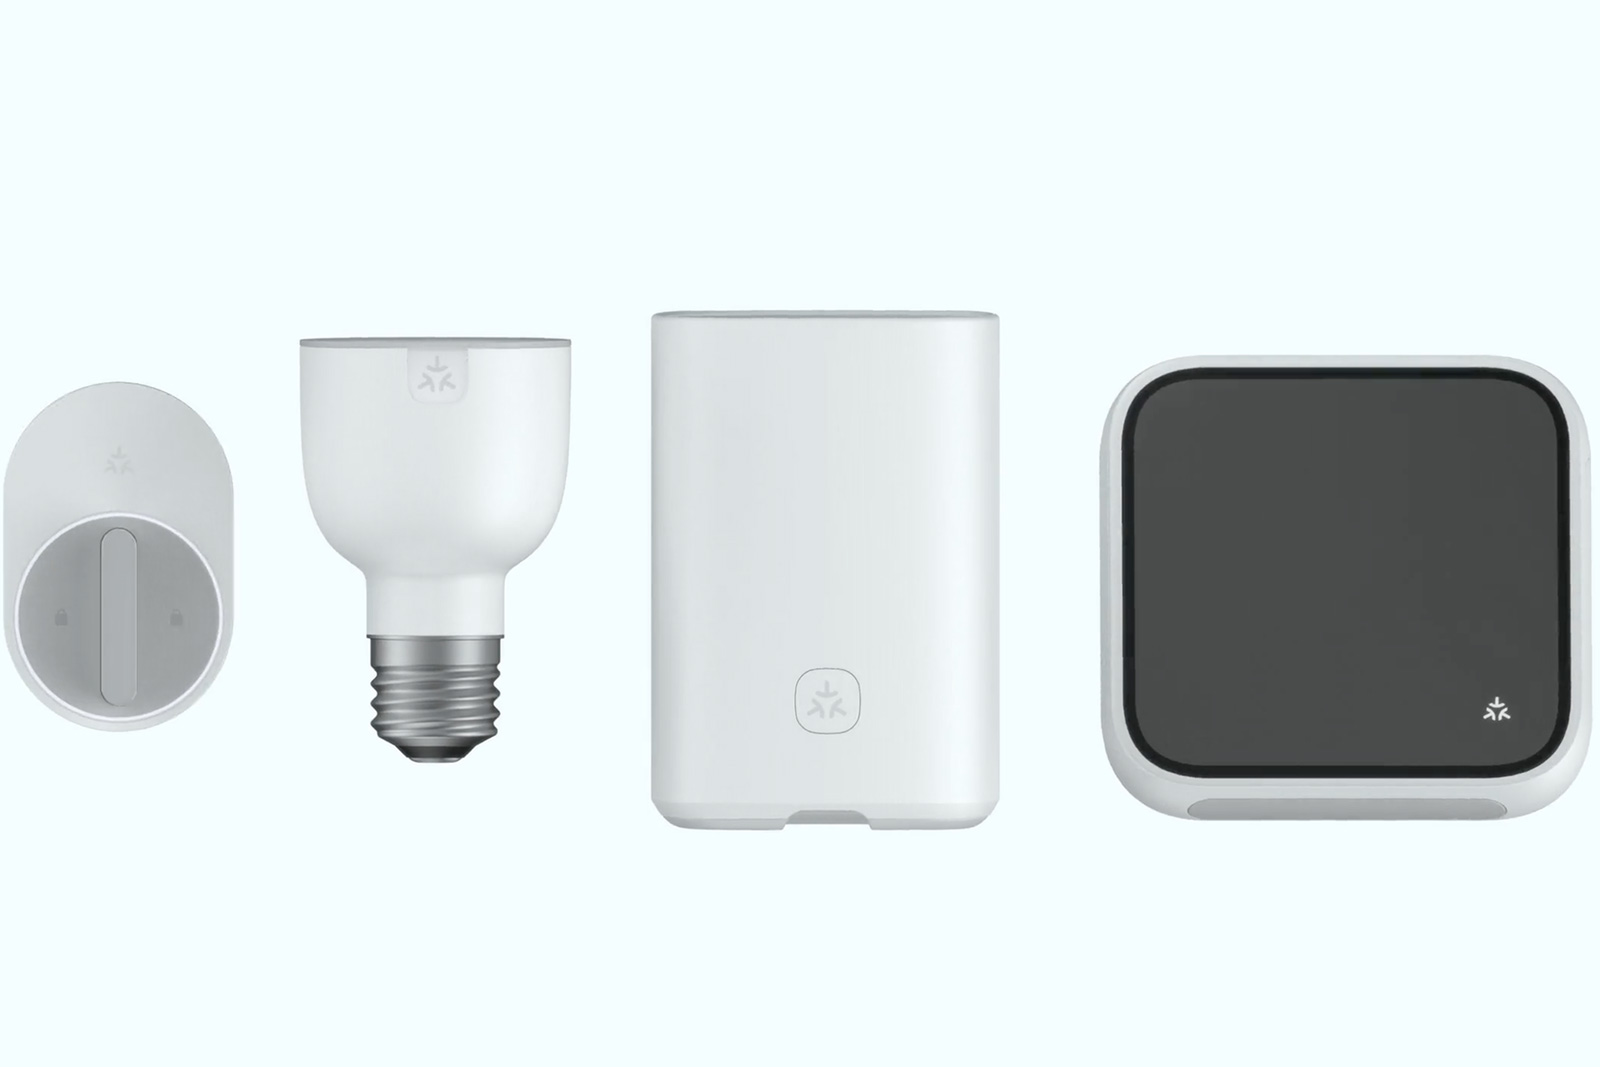 The Matter smart home standard is finally available